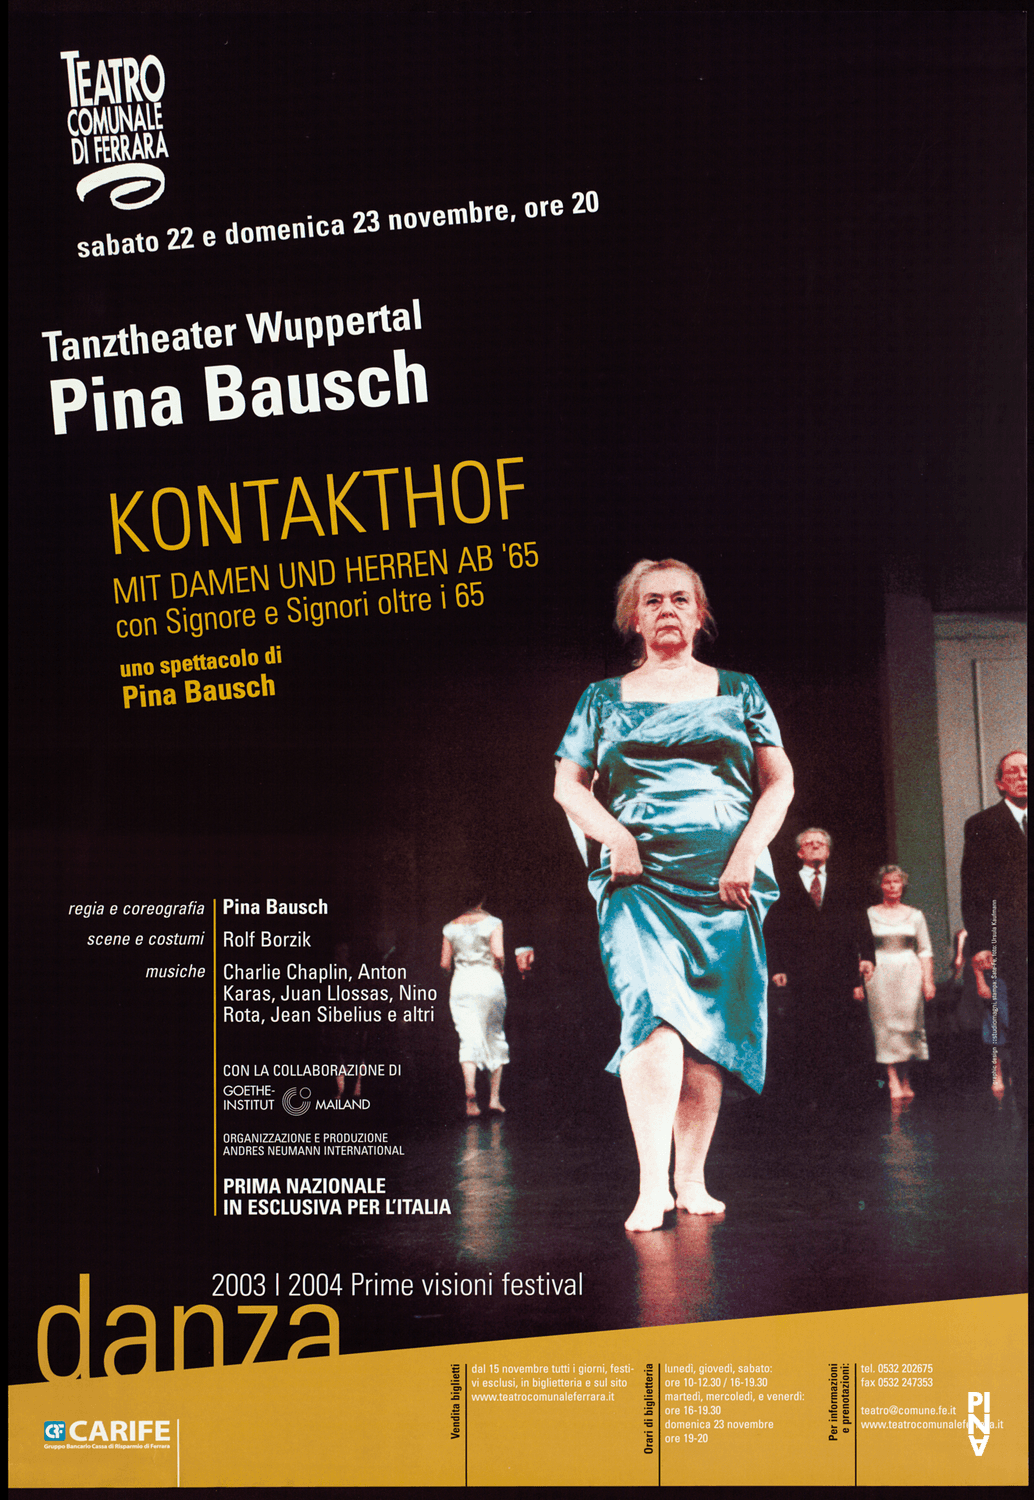 Poster for “Kontakthof. With Ladies and Gentlemen over 65” by Pina Bausch in Ferrara, 11/22/2003 – 11/23/2003